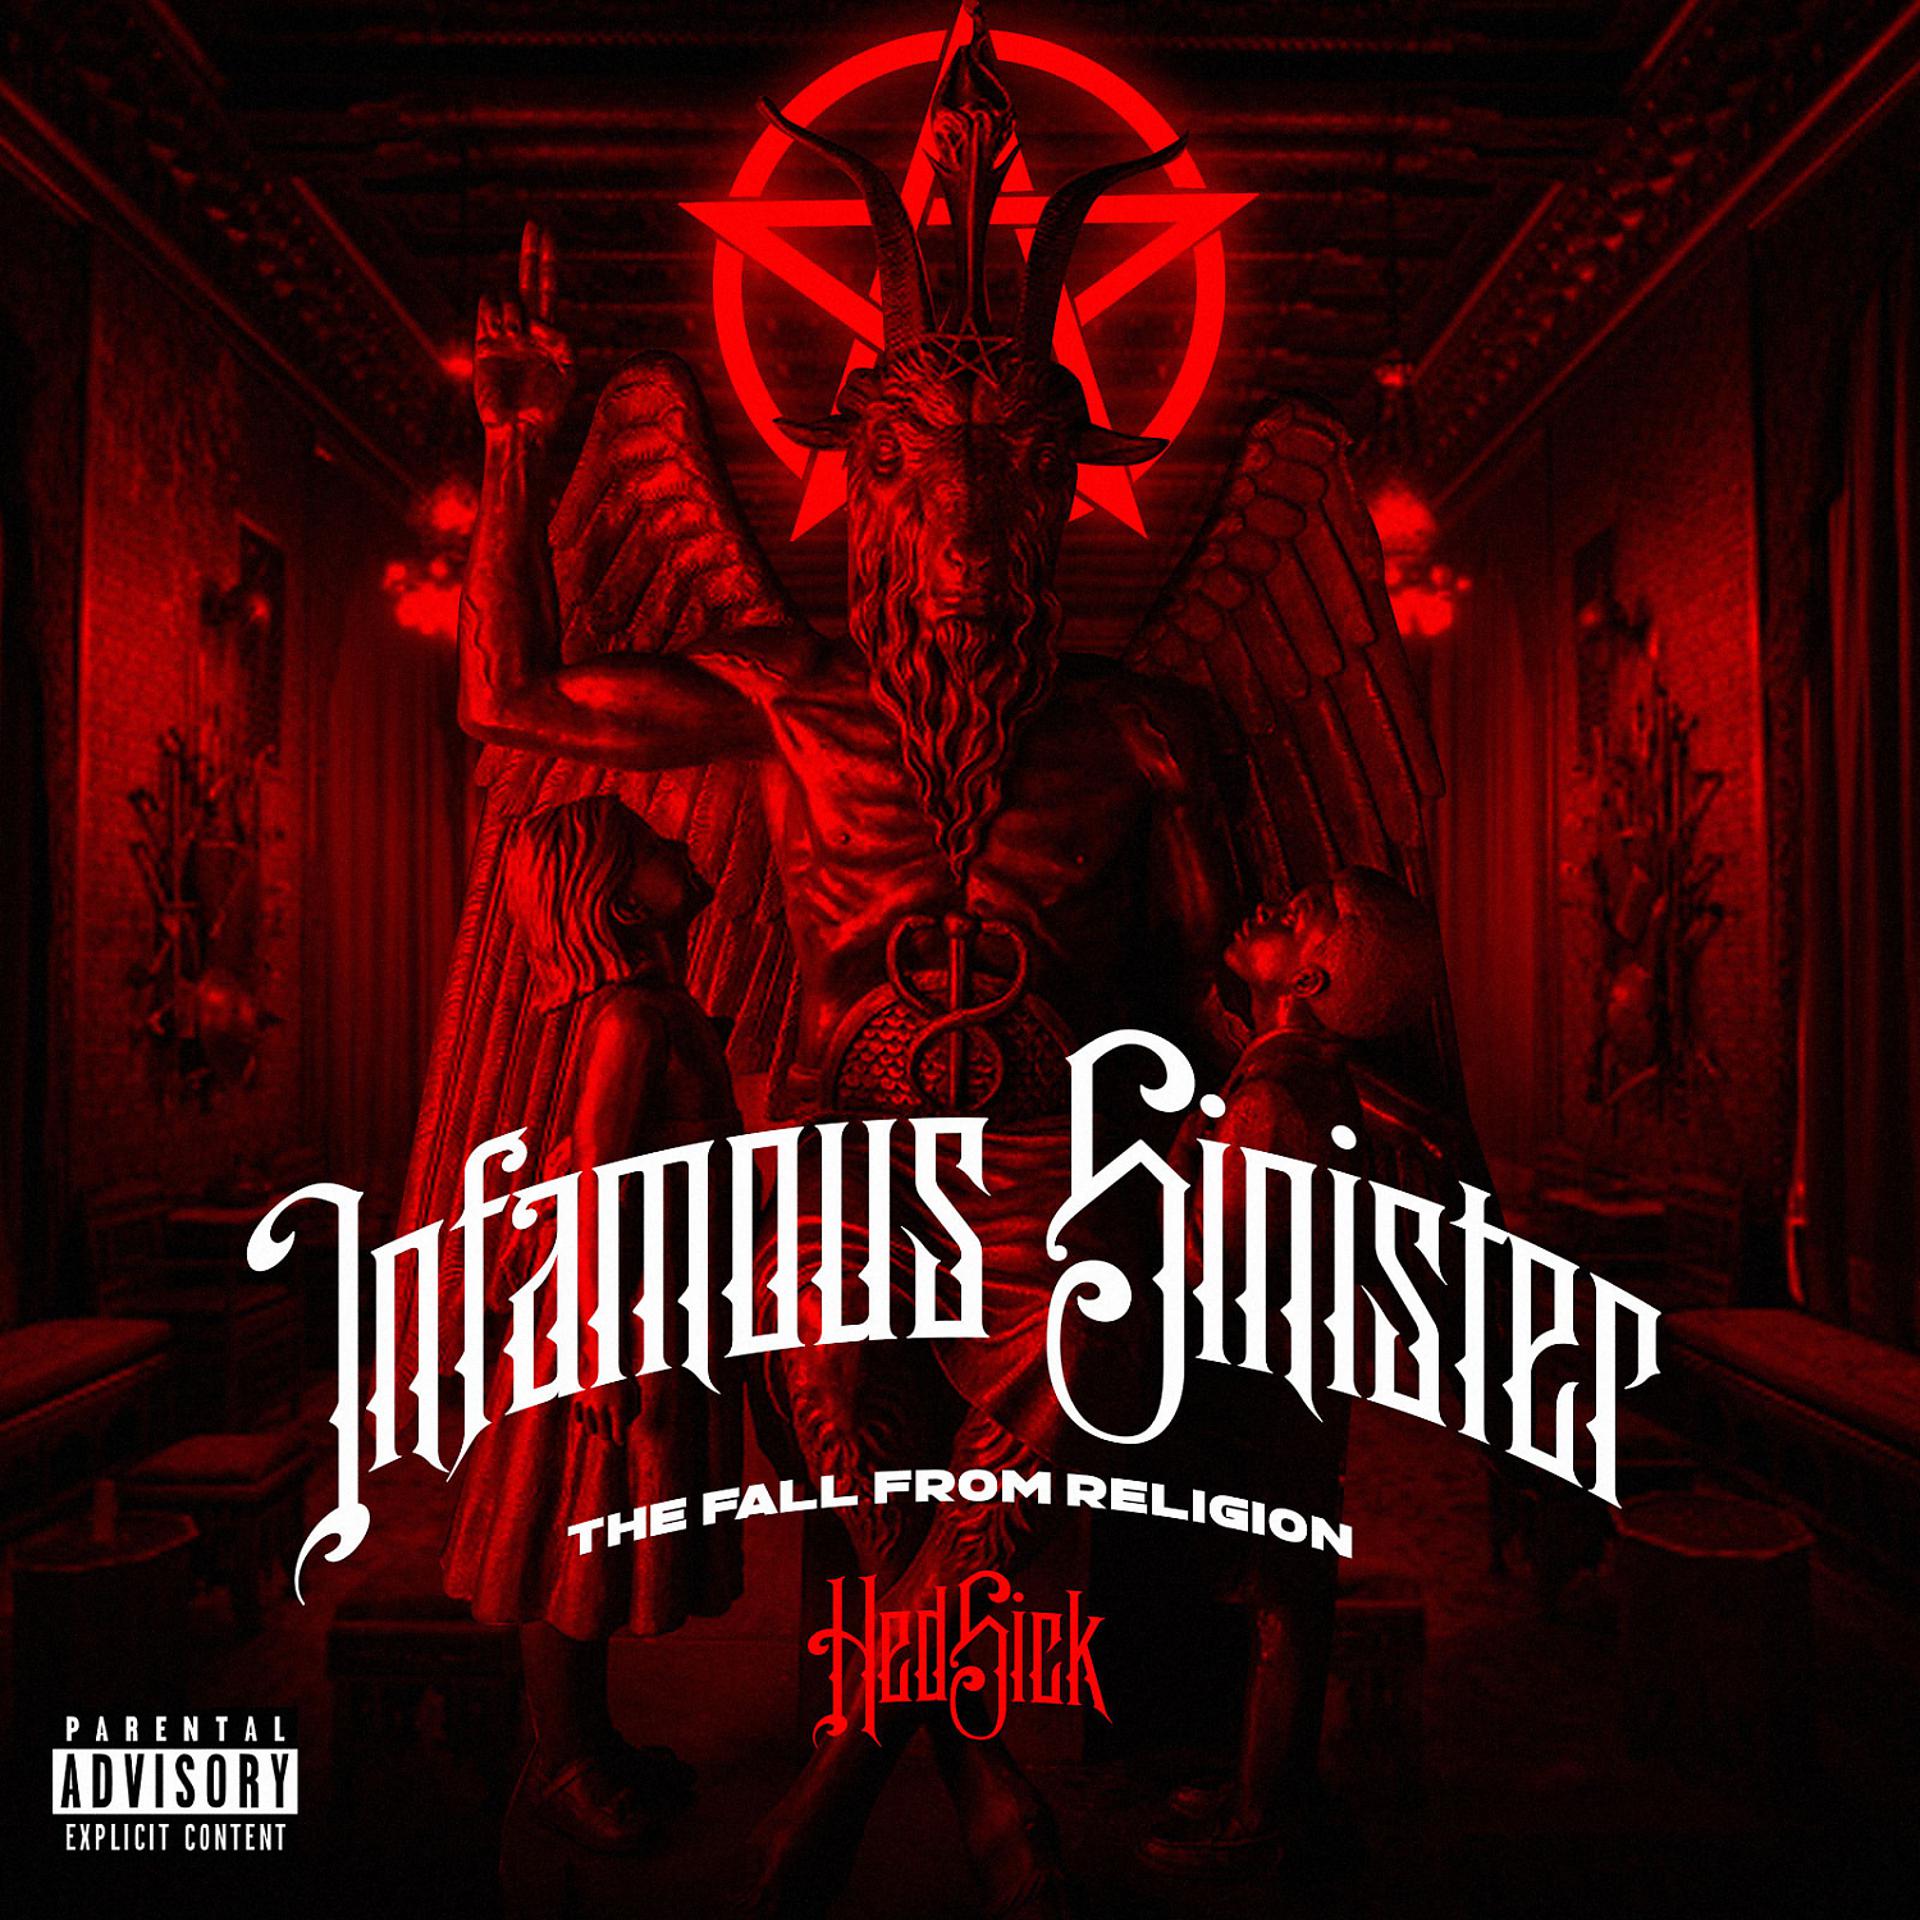 Постер альбома Infamous Sinister. The Fall From Religion.